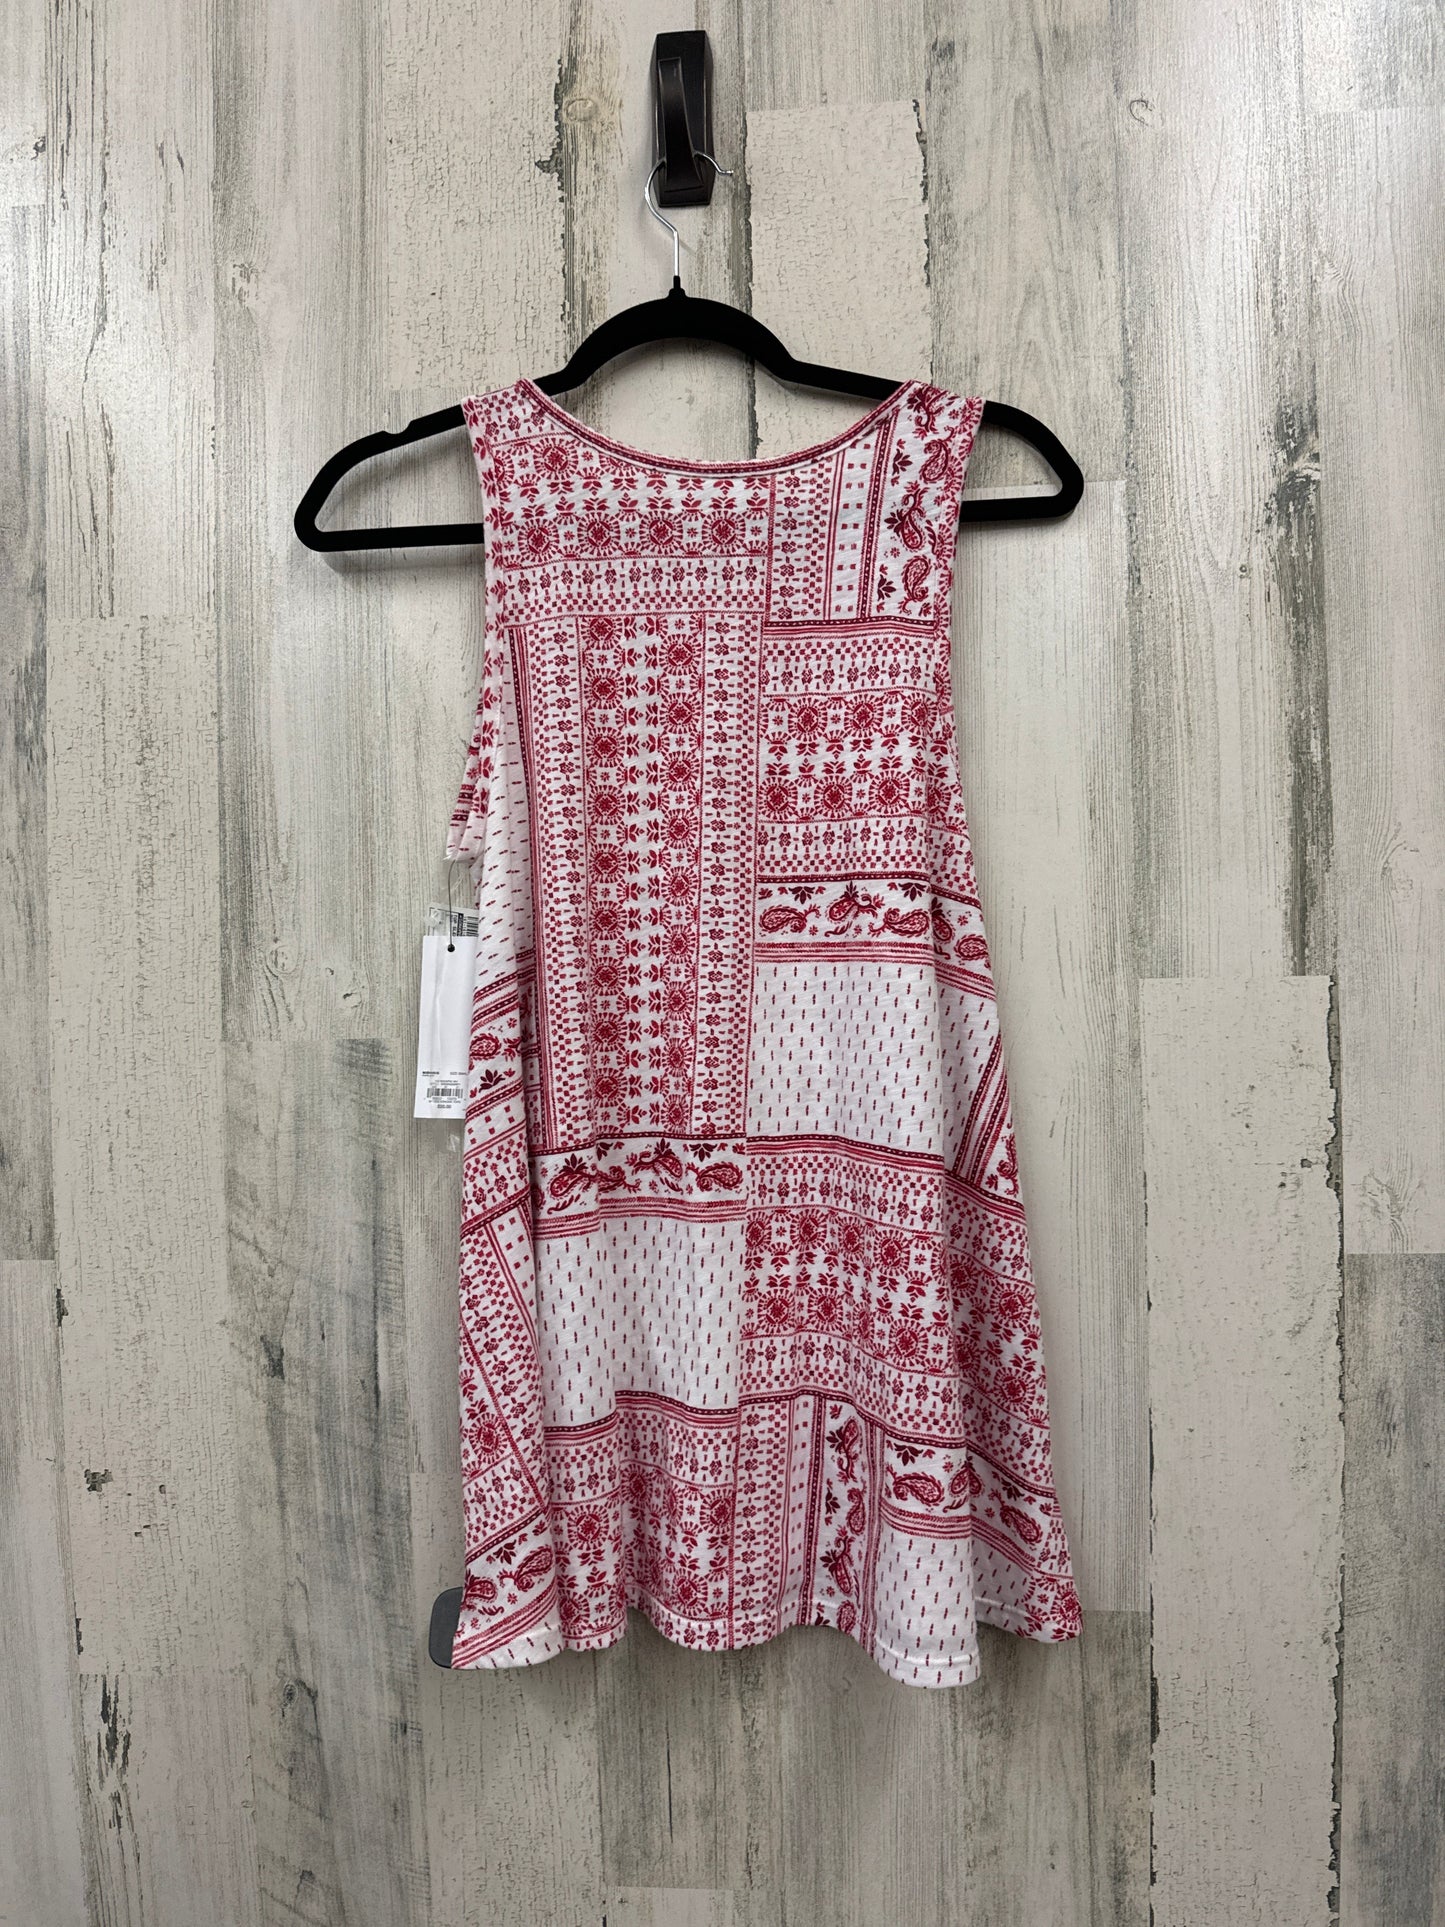 Top Sleeveless By Sonoma  Size: S